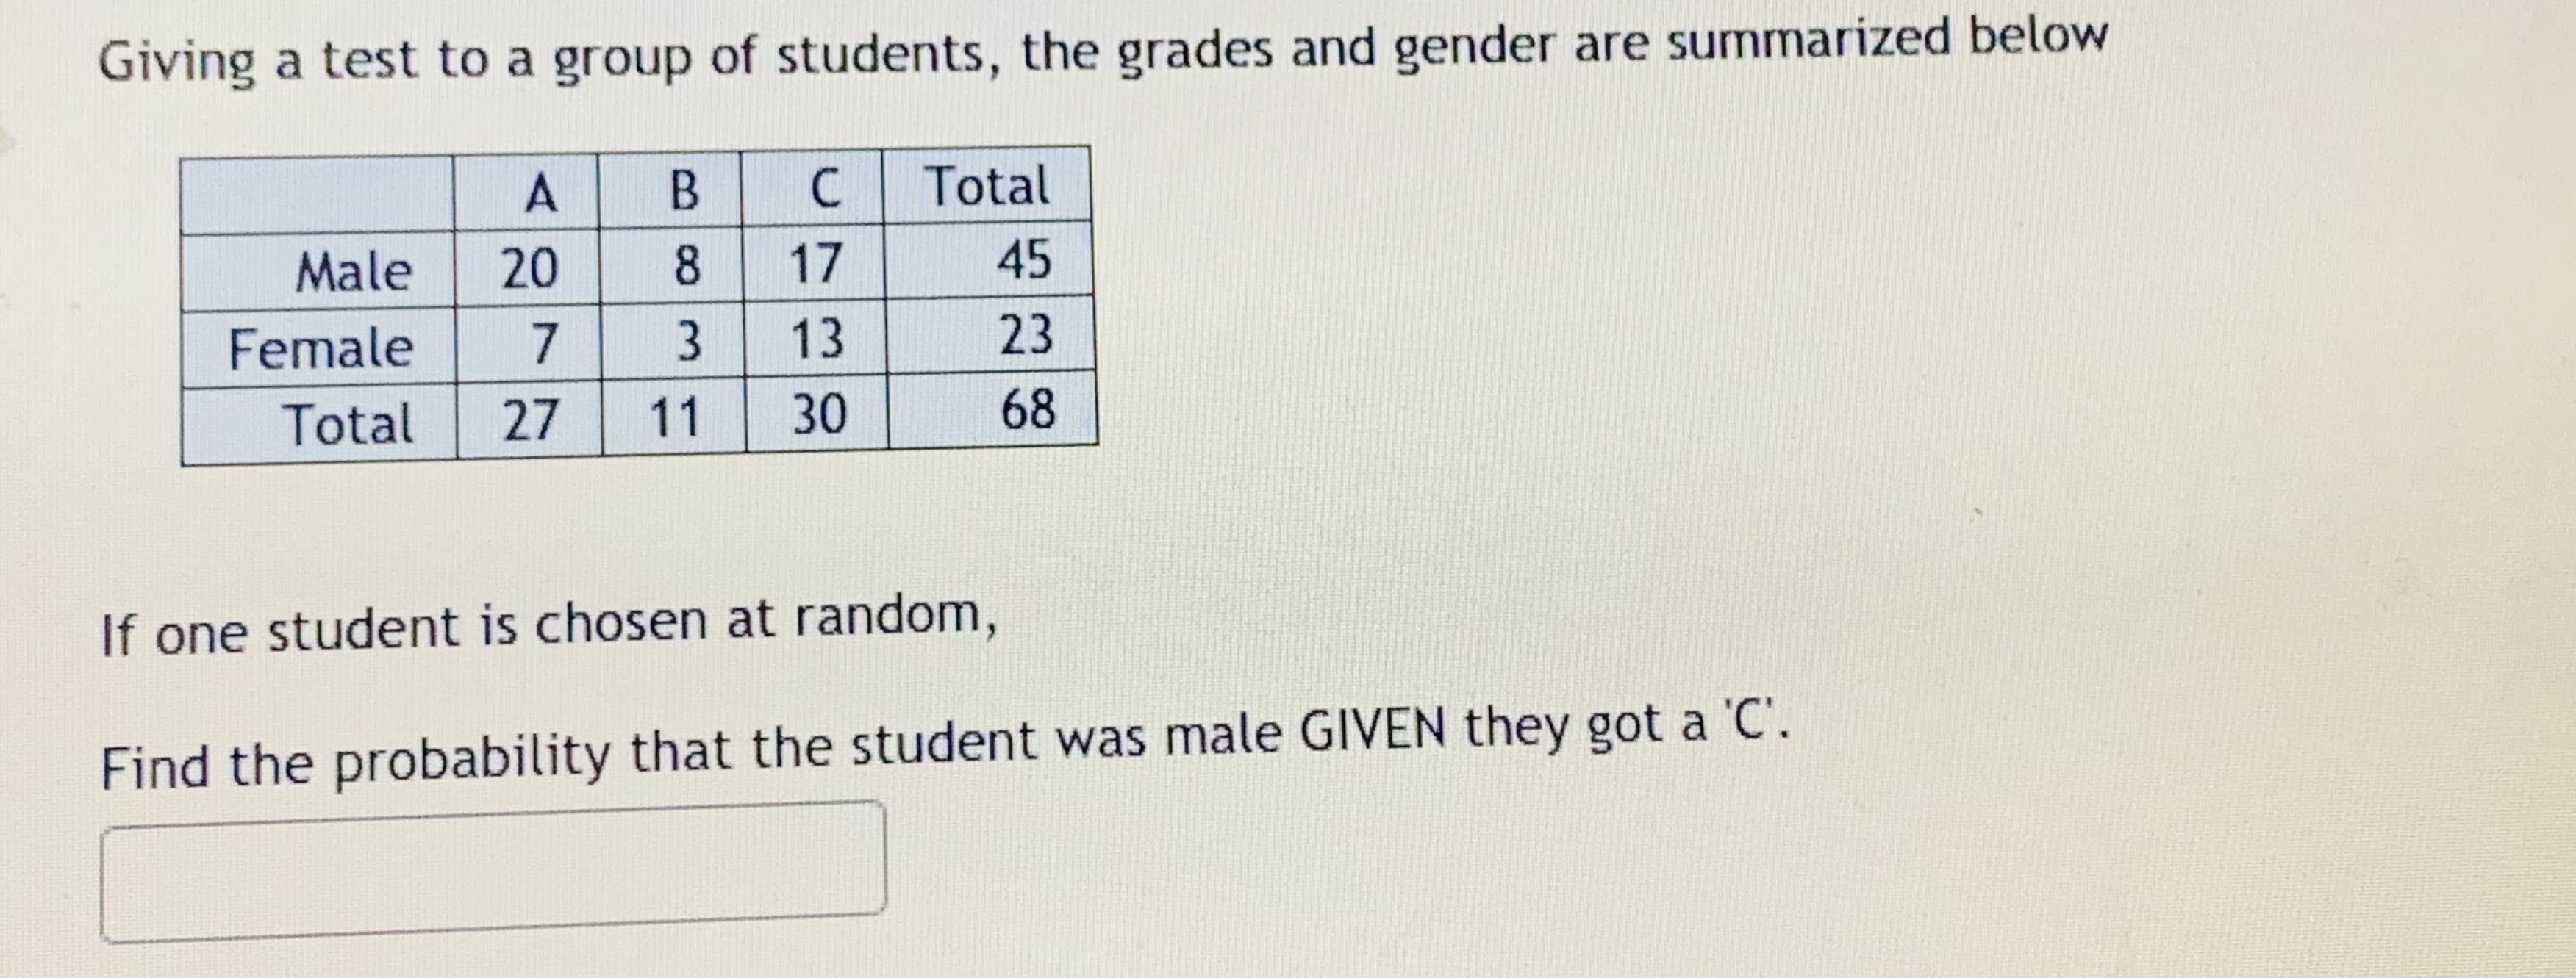 If one student is chosen at random,
Find the probability that the student was male GIVEN they got a 'C'.
